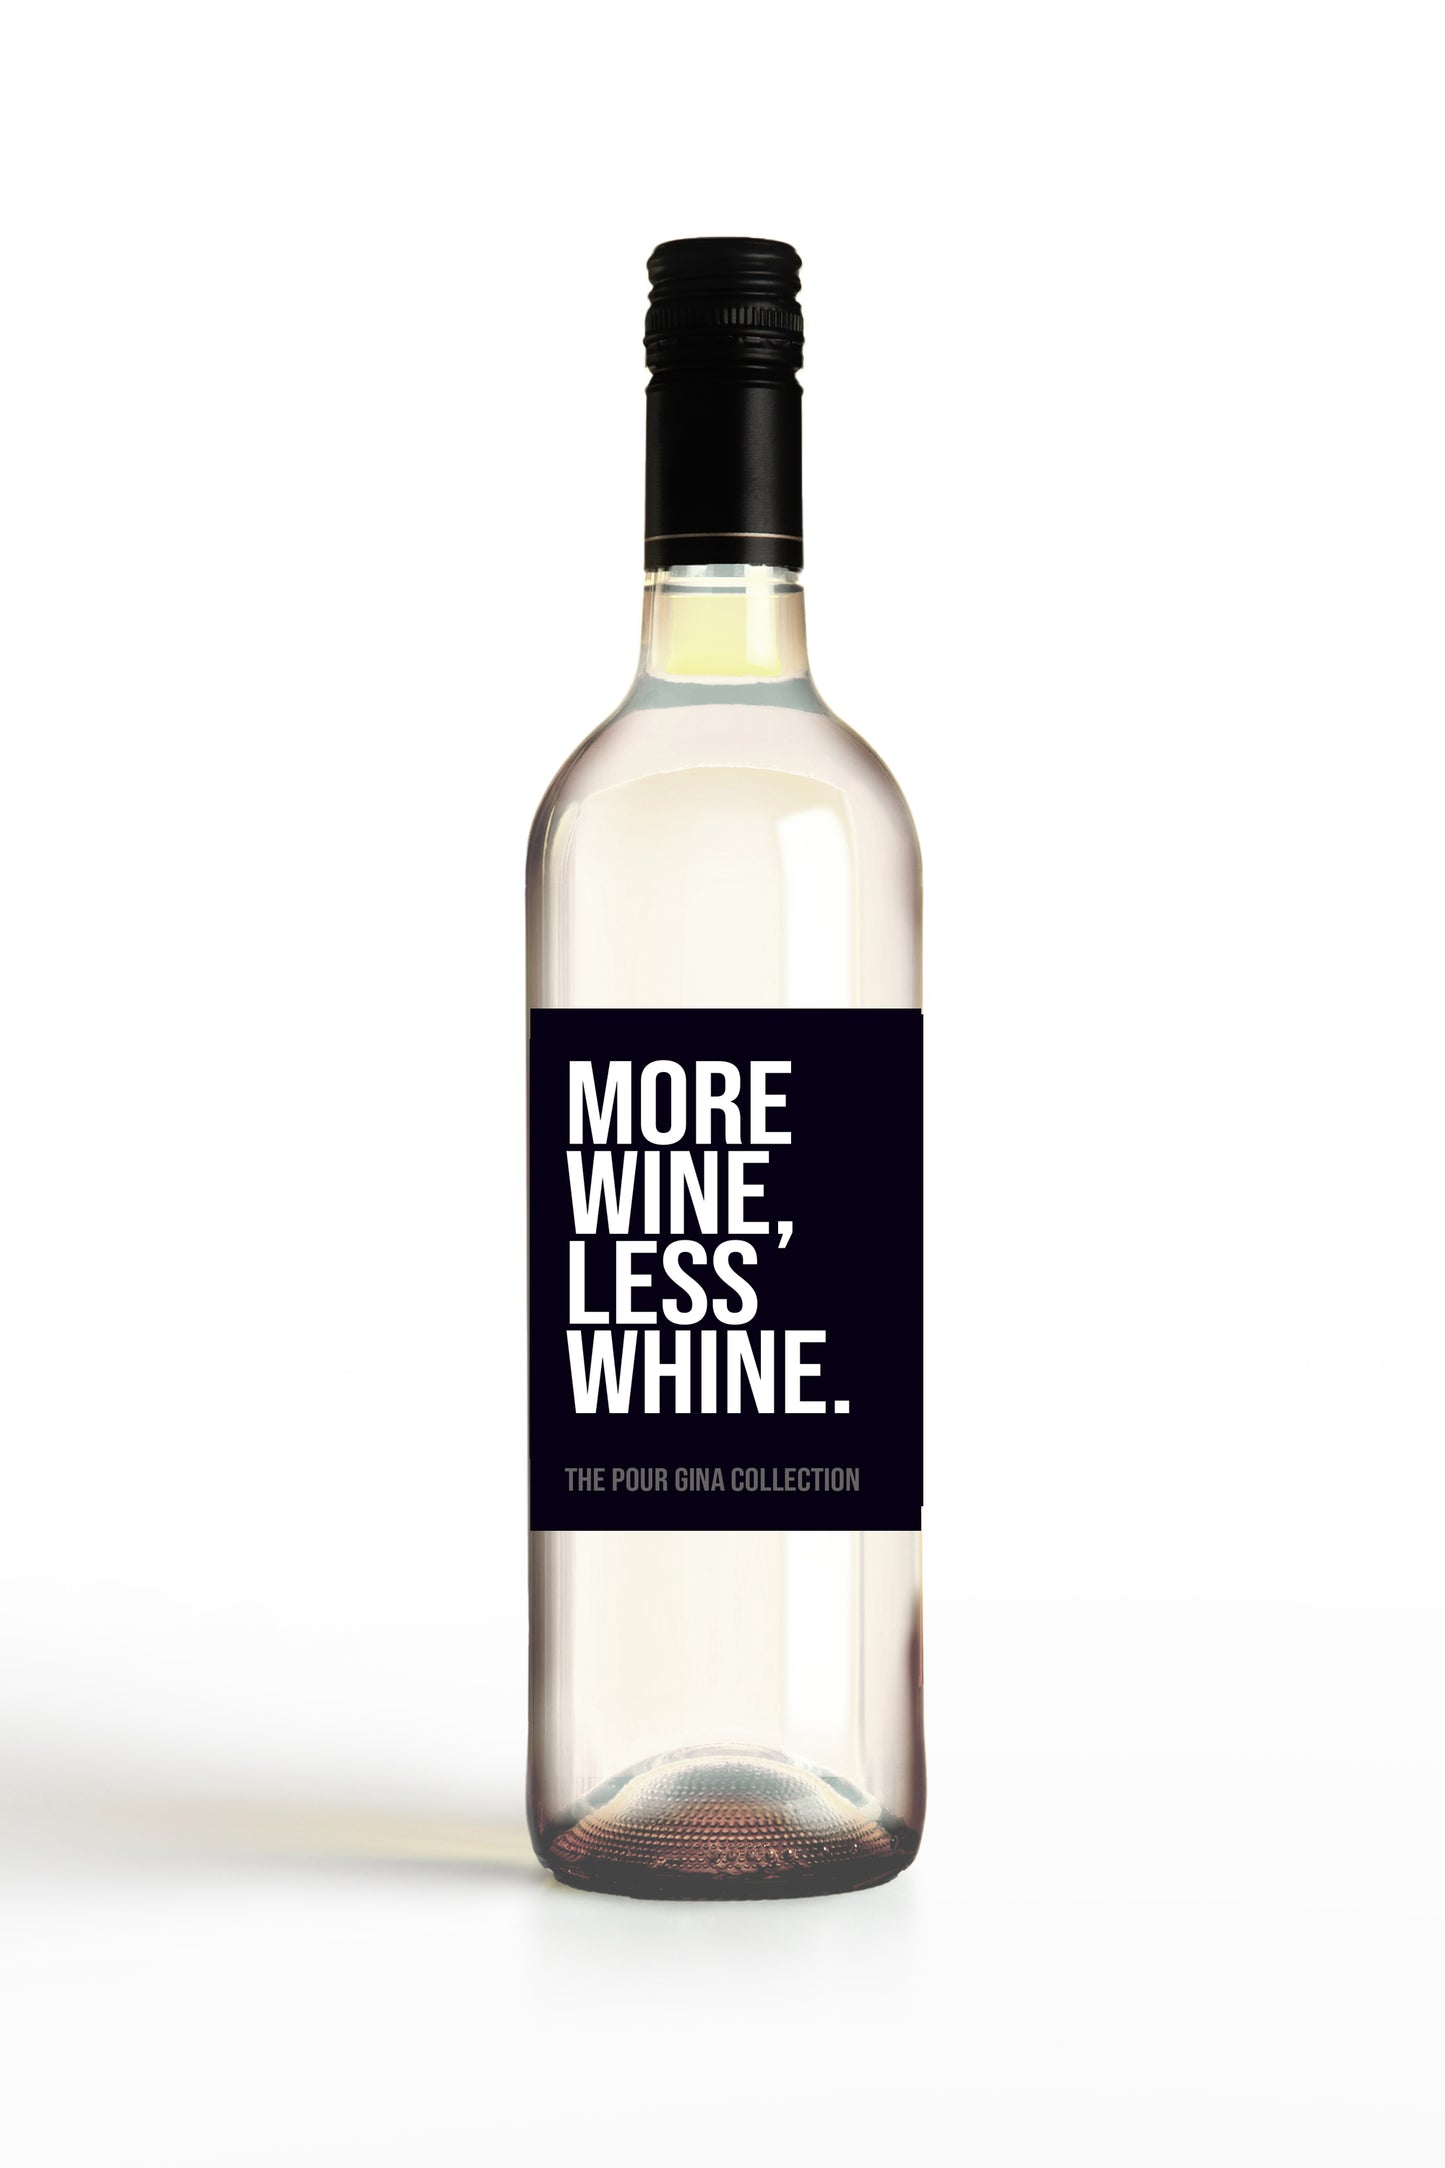 More Wine, Less Whine.